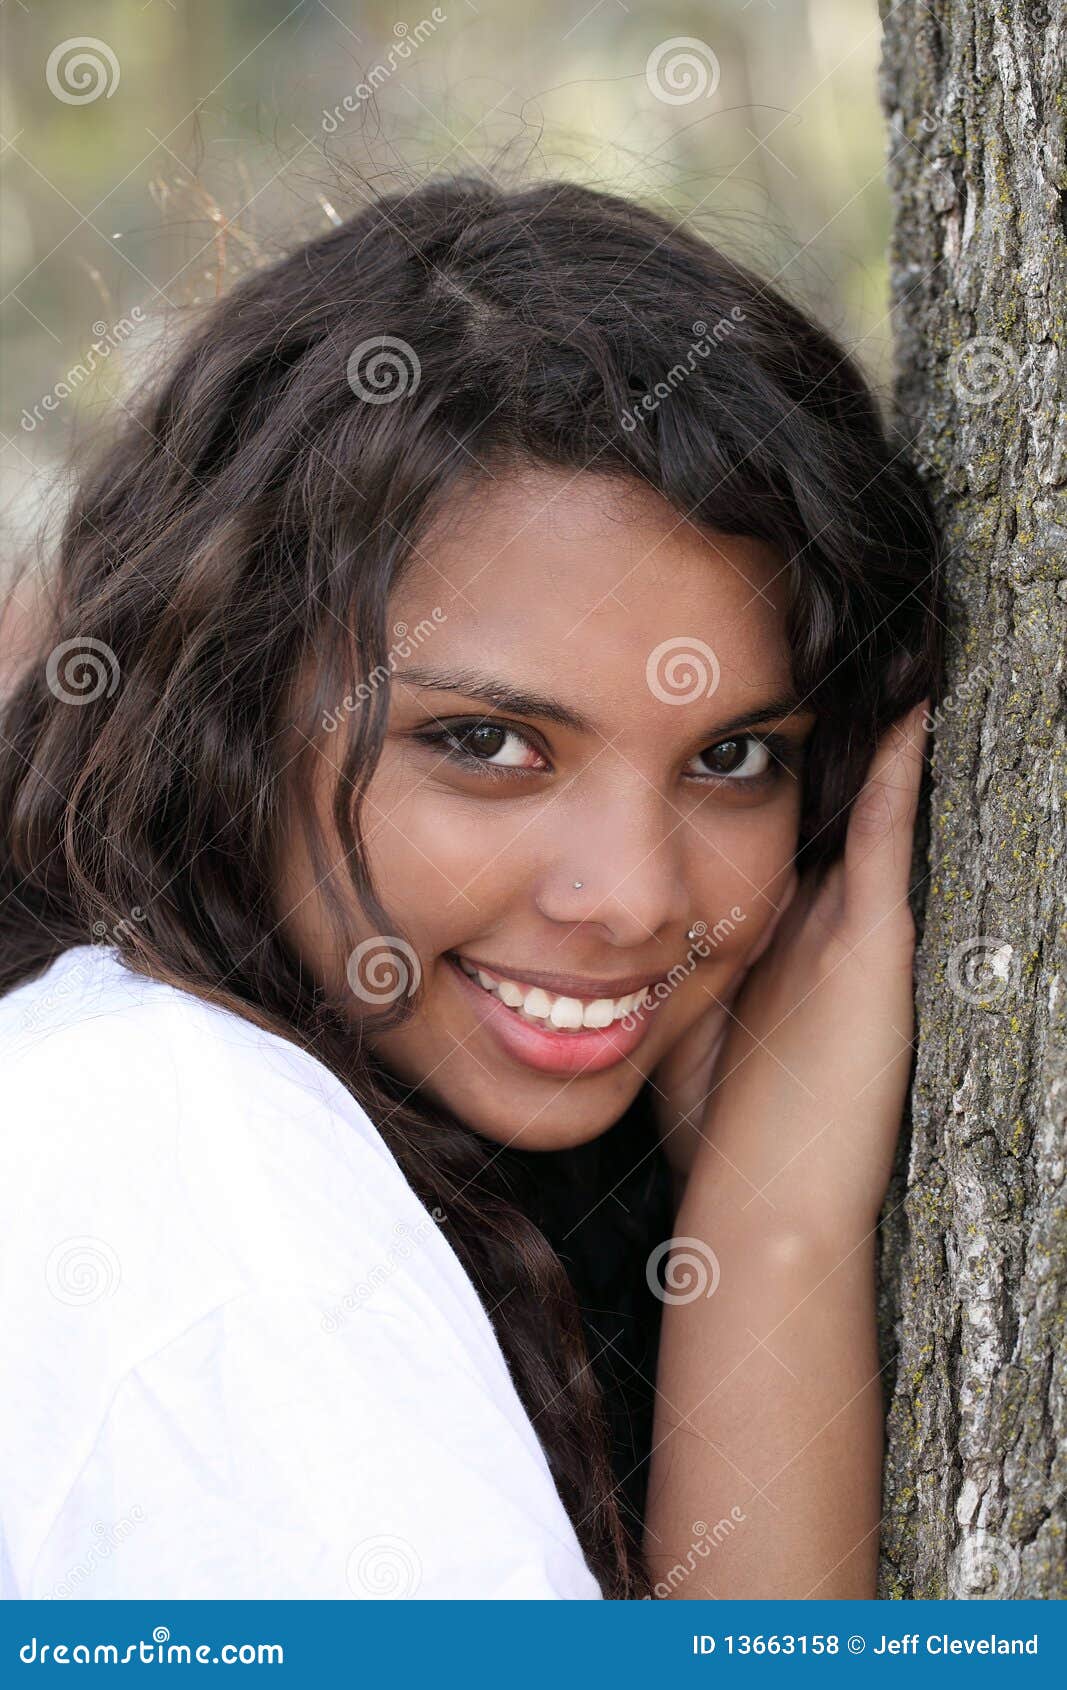 Young Mixed Teen Girl Outdoor Portrait Tree Stock Photo Im